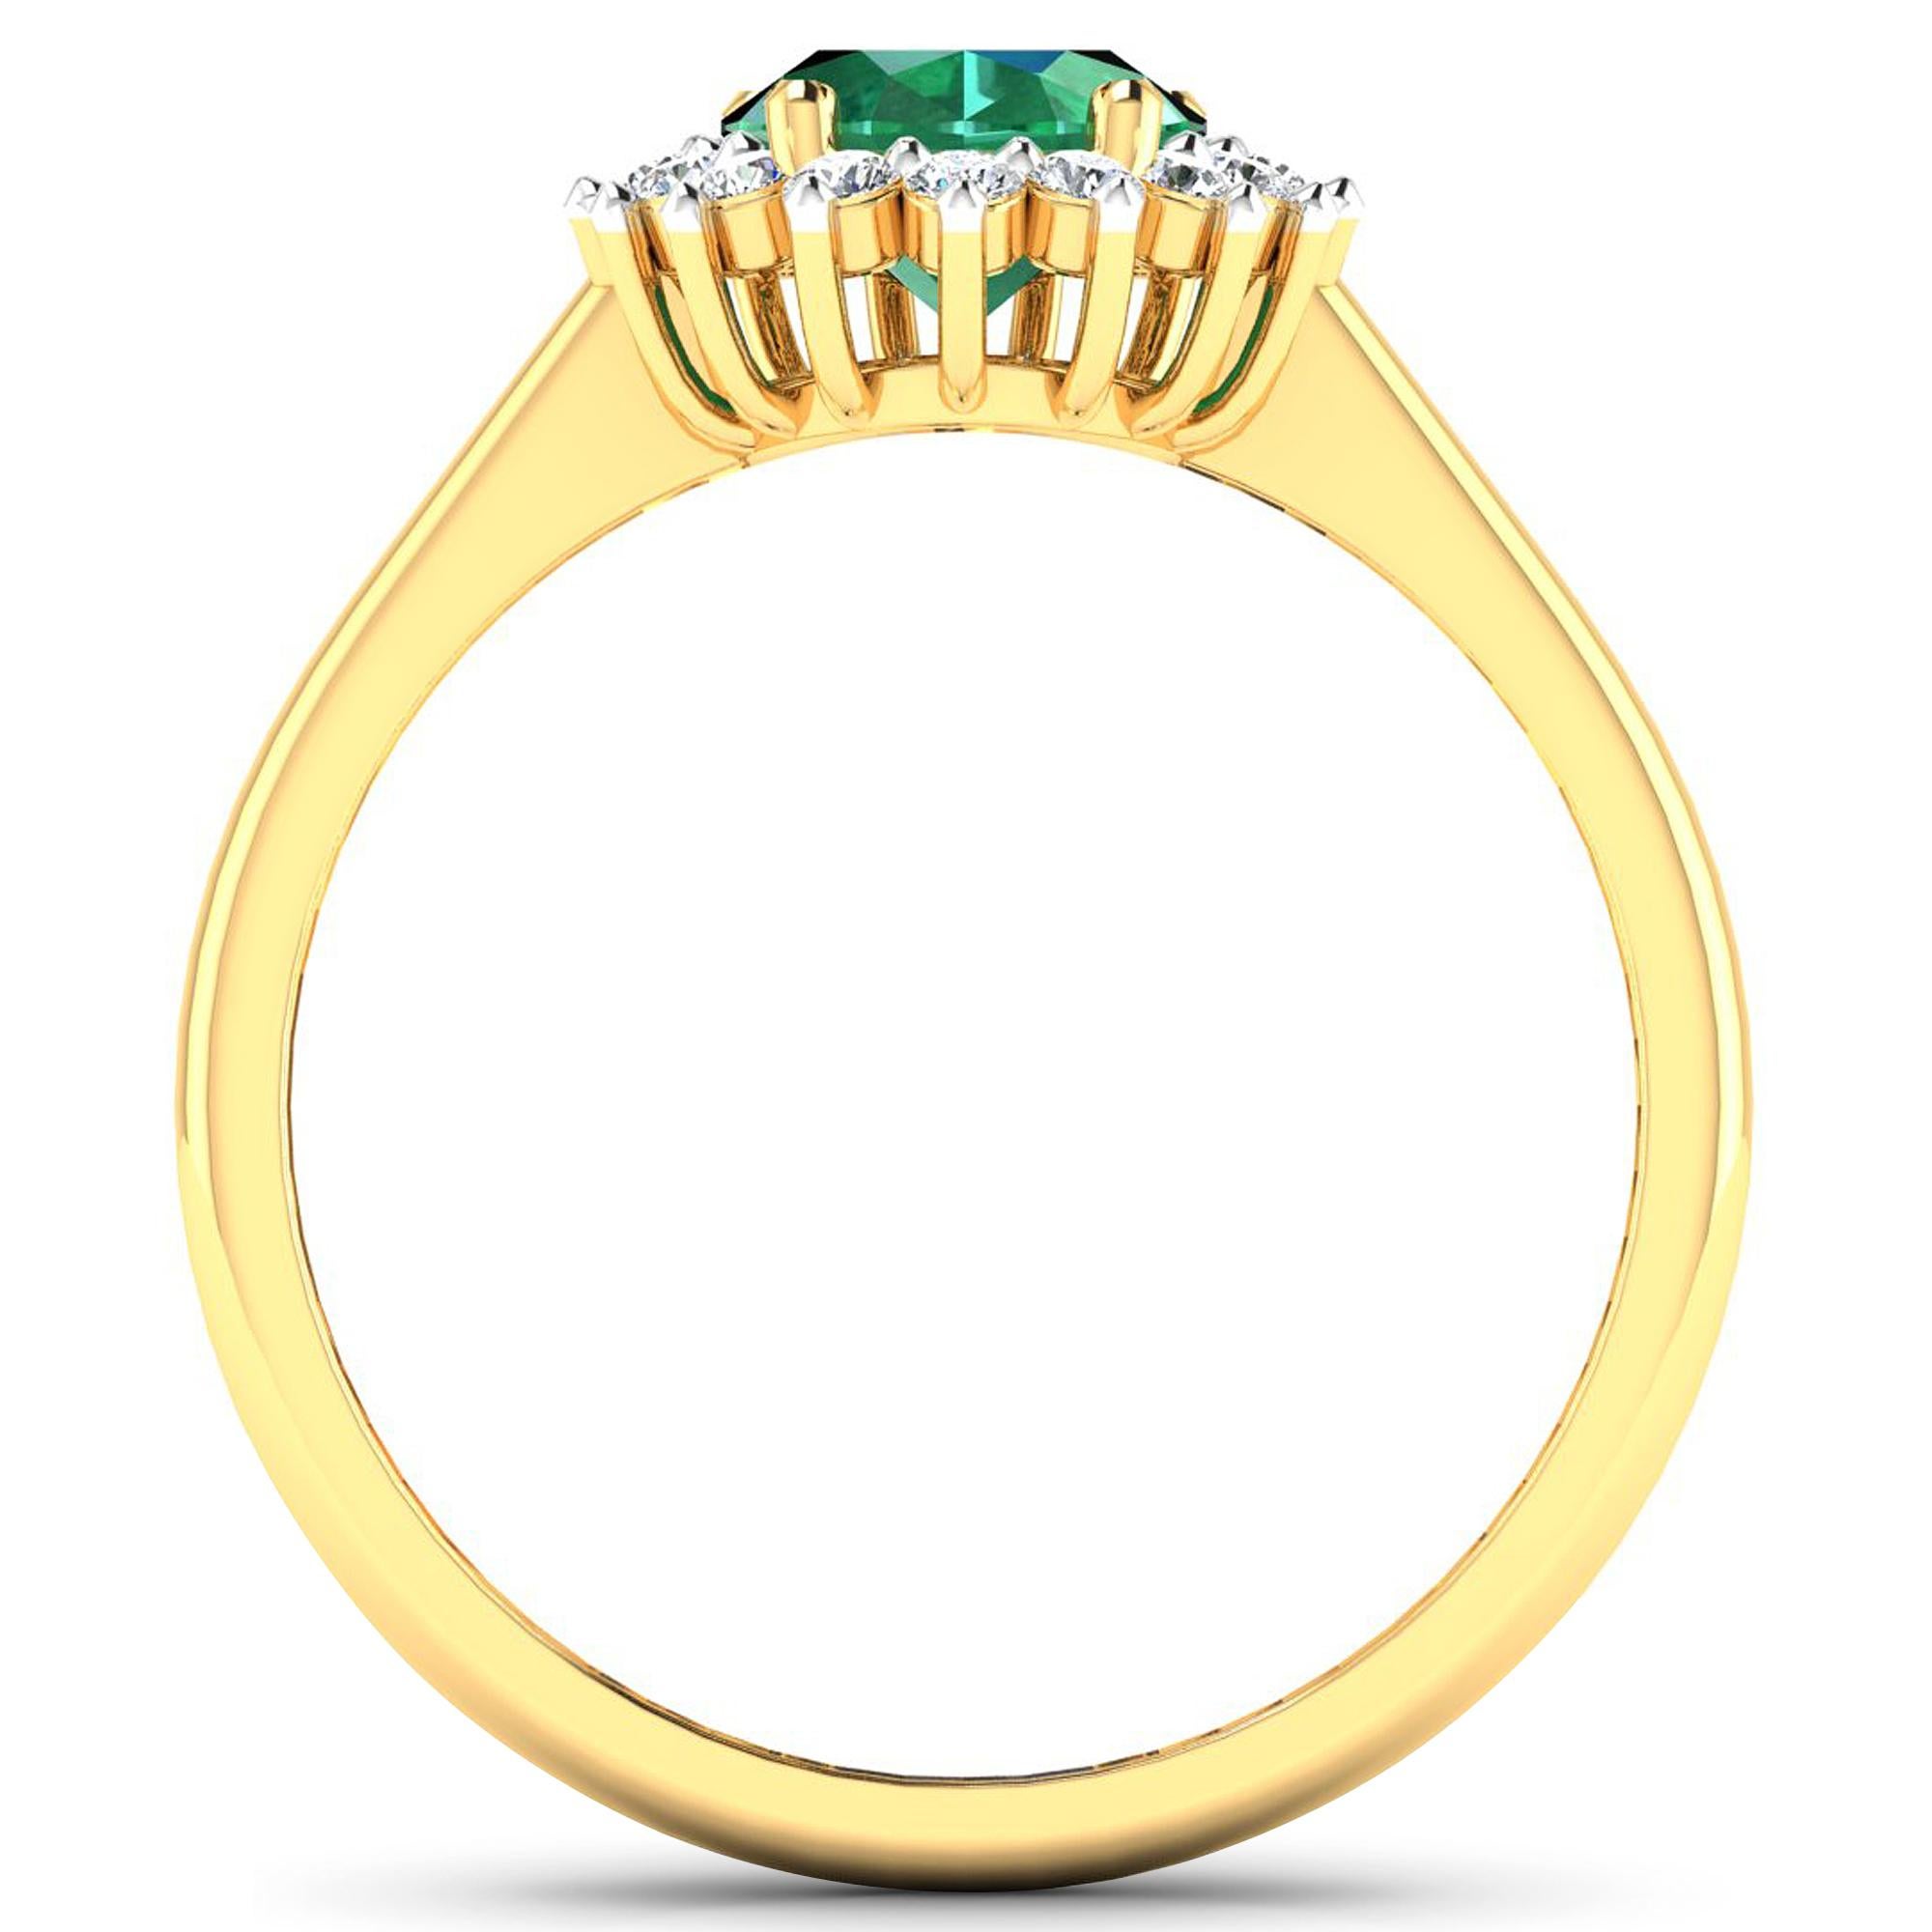 Emerald Gold Ring, 14Kt Gold Emerald & Diamond Engagement Ring, 1.87ctw.

Flaunt yourself with this 14K Yellow Gold Emerald & White Diamond Engagement Ring. The setting is inlaid with 20 accented full-cut White Diamond round stones for a total stone